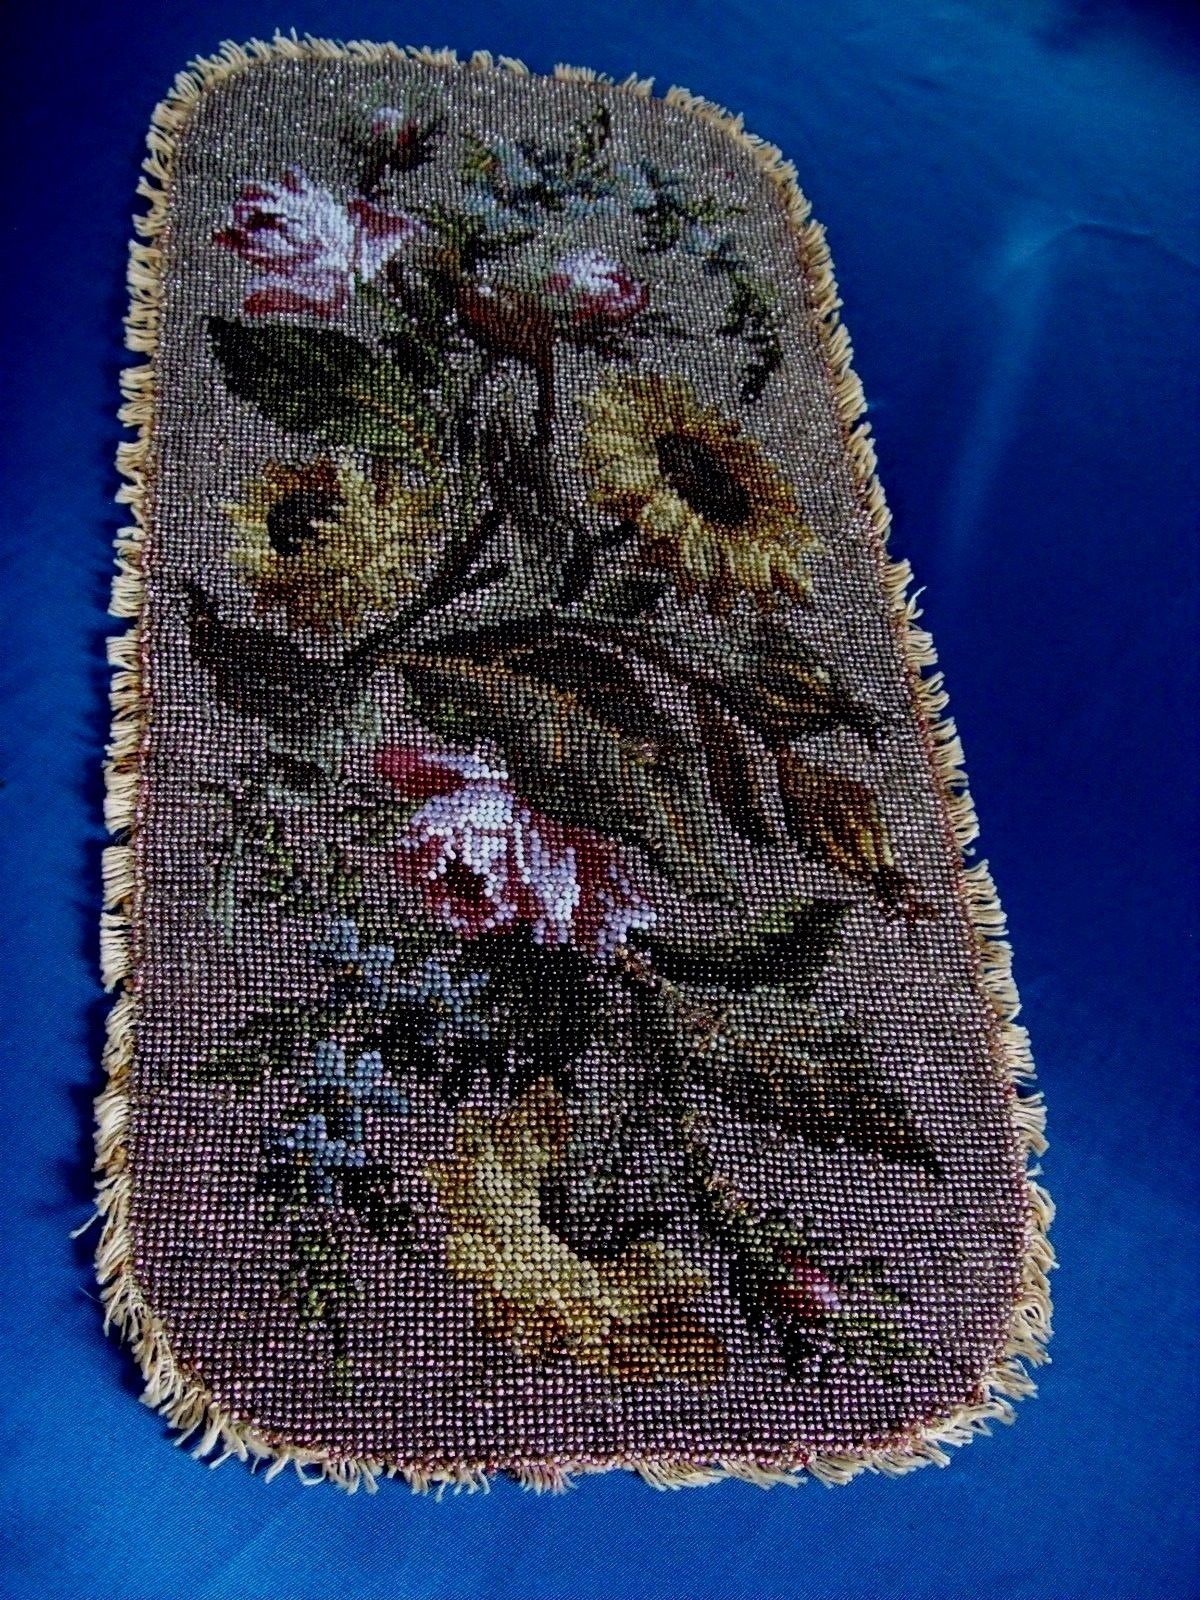 ANTIQUE HAND EMBROIDERED BEAD WORK PANEL ROSES SUNFLOWER ALL BEADED NEEDLEPOINT